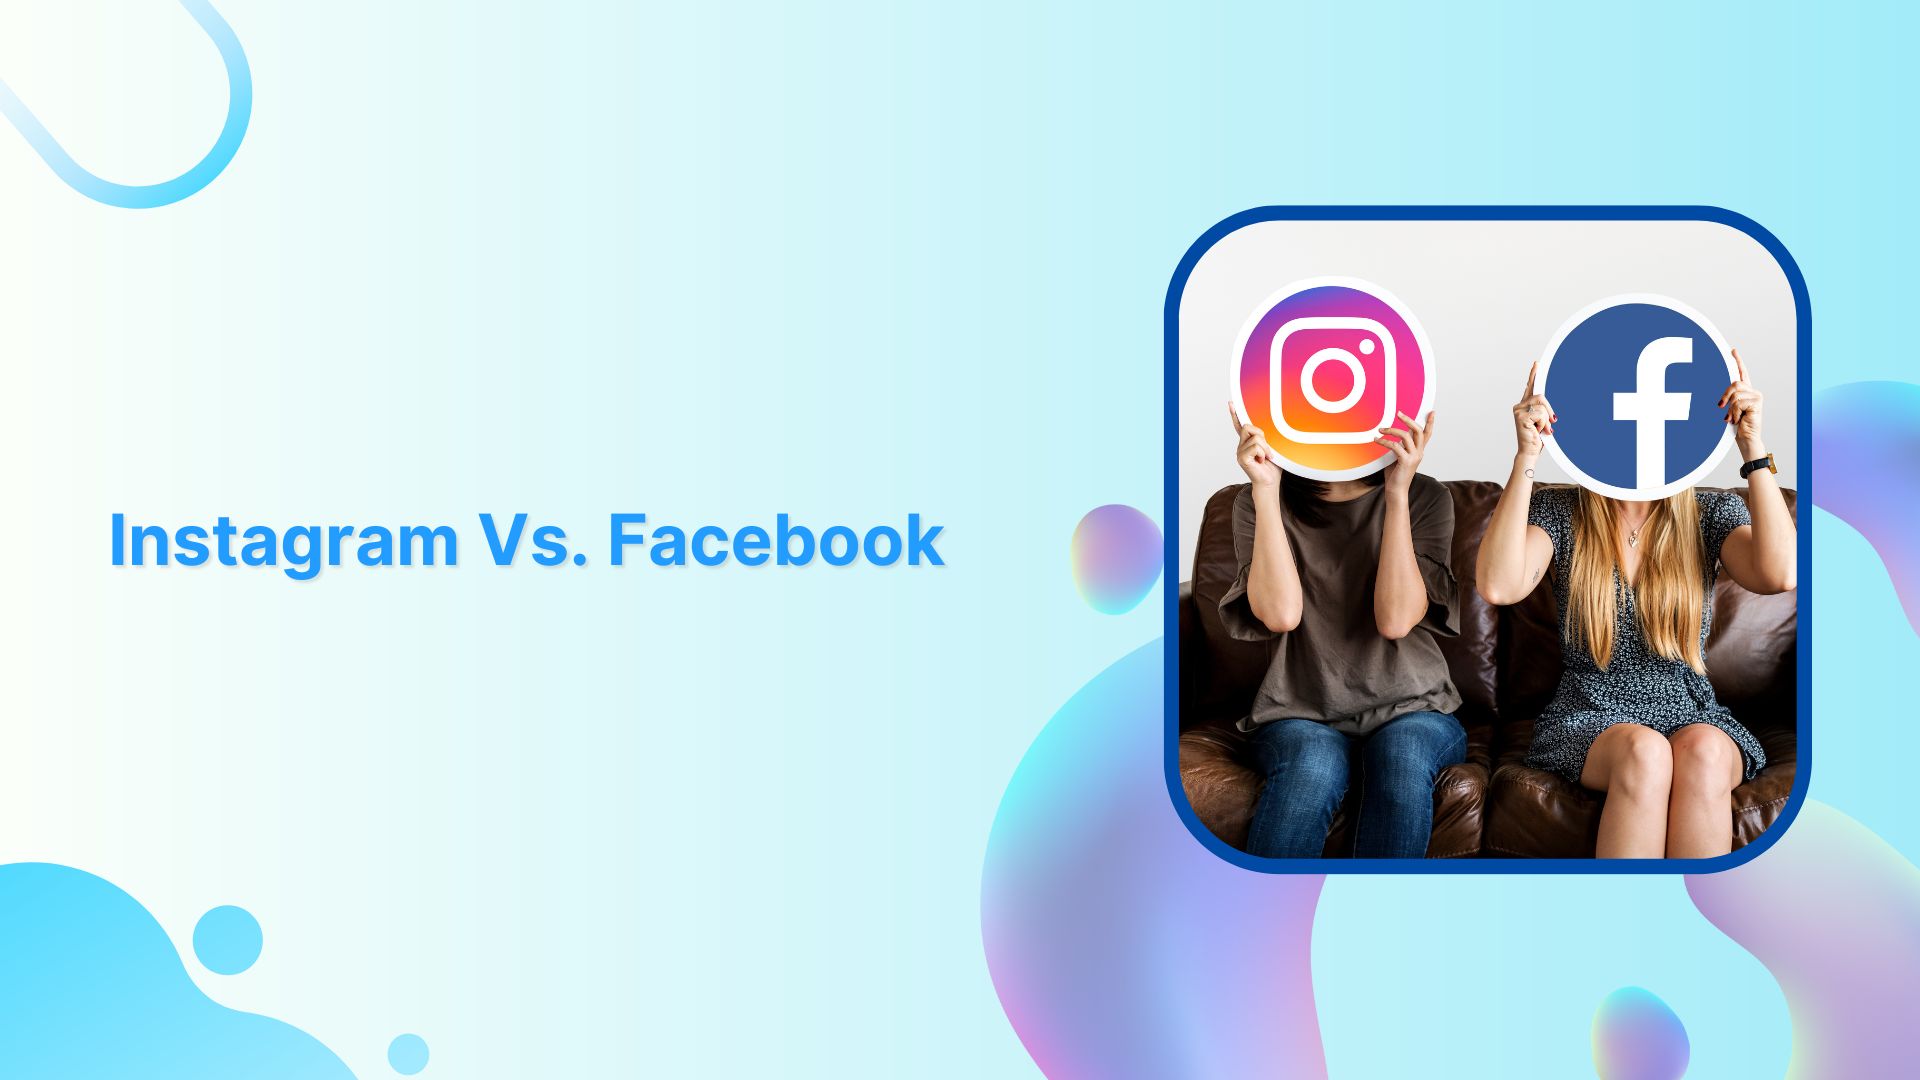 Which Is Better For Your Brand’s Strategy: Instagram Vs. Facebook?